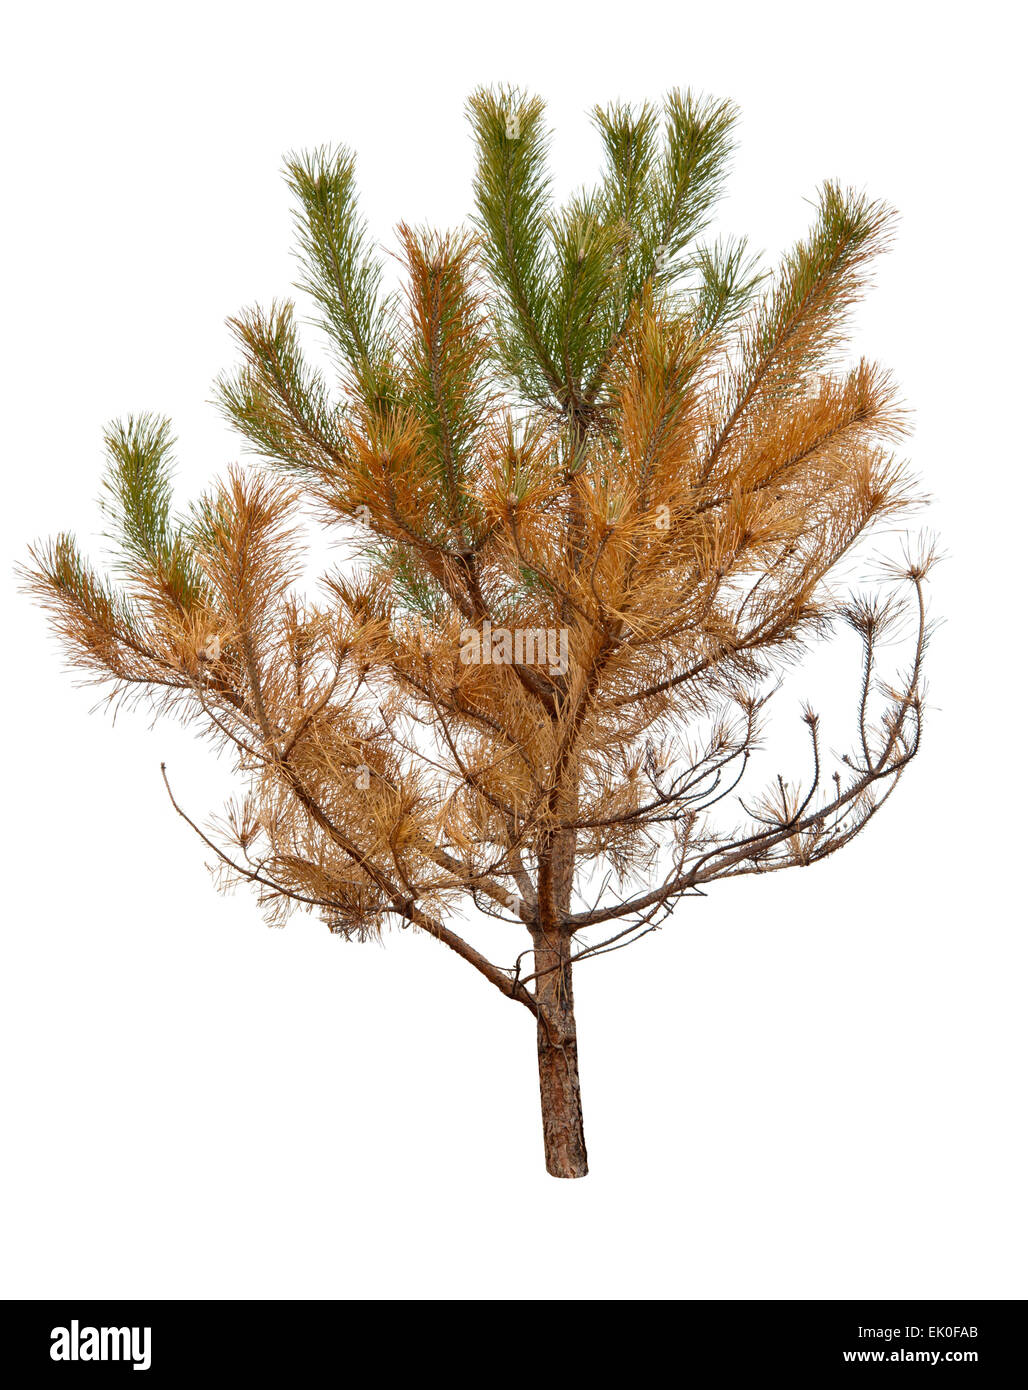 dry pine tree is isolated on a white background Stock Photo